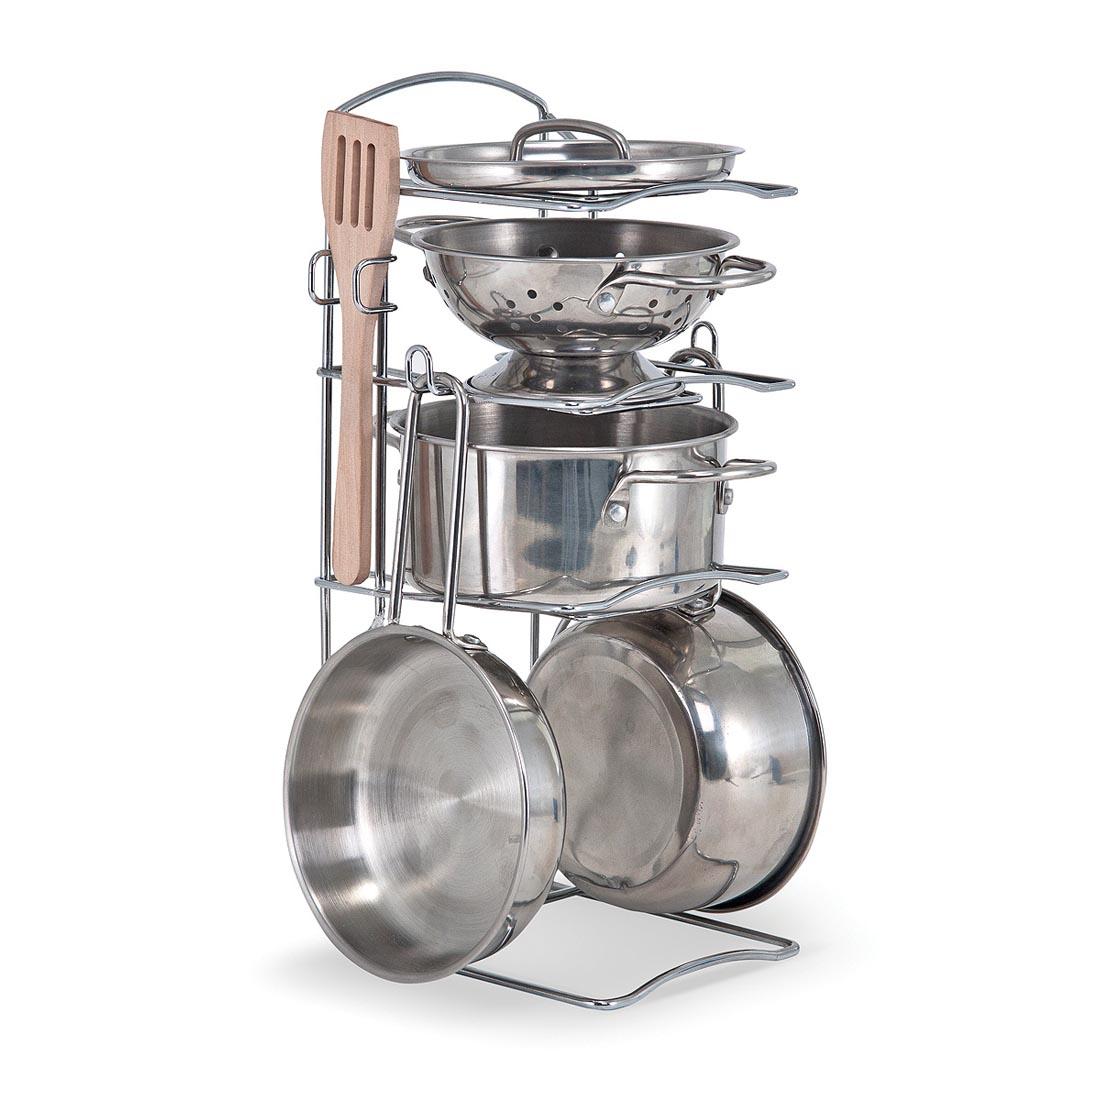 Let's Play House Stainless Steel Pots & Pans Play Set